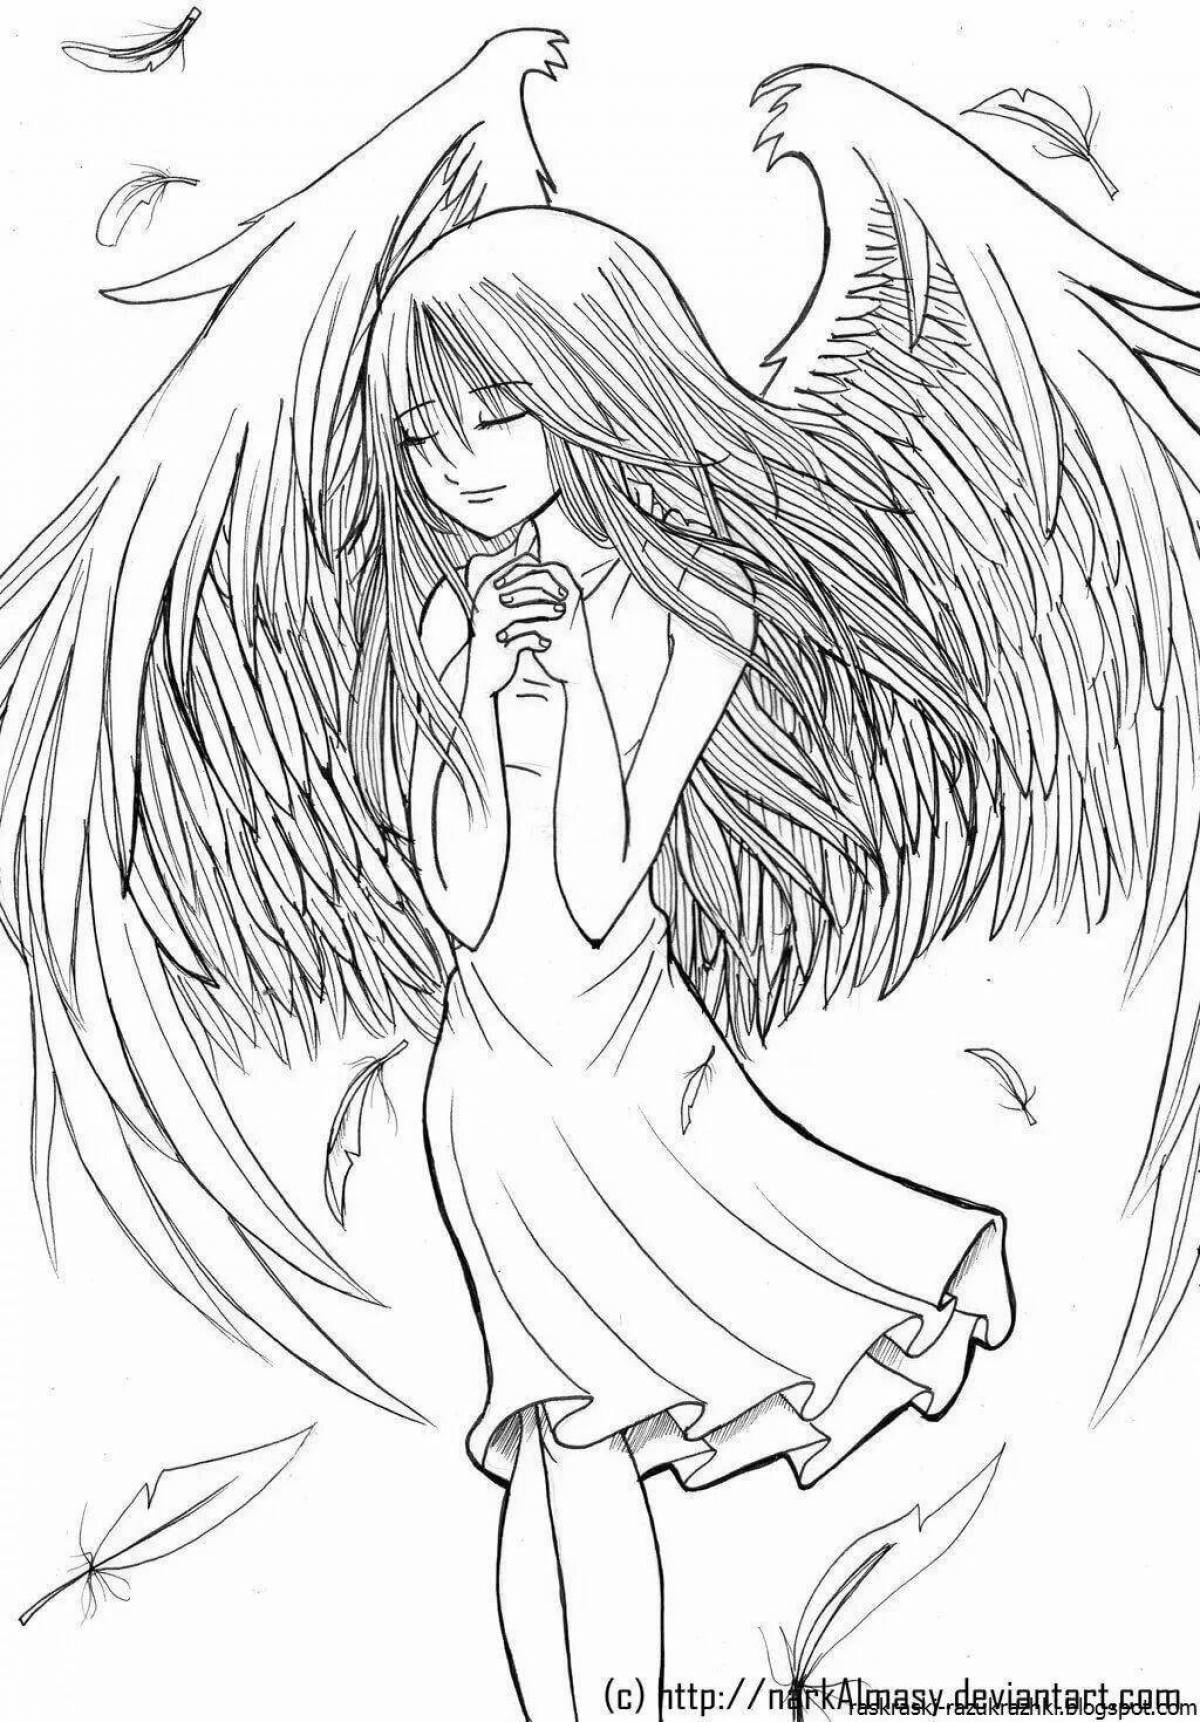 Coloring book with angel wings angel girl